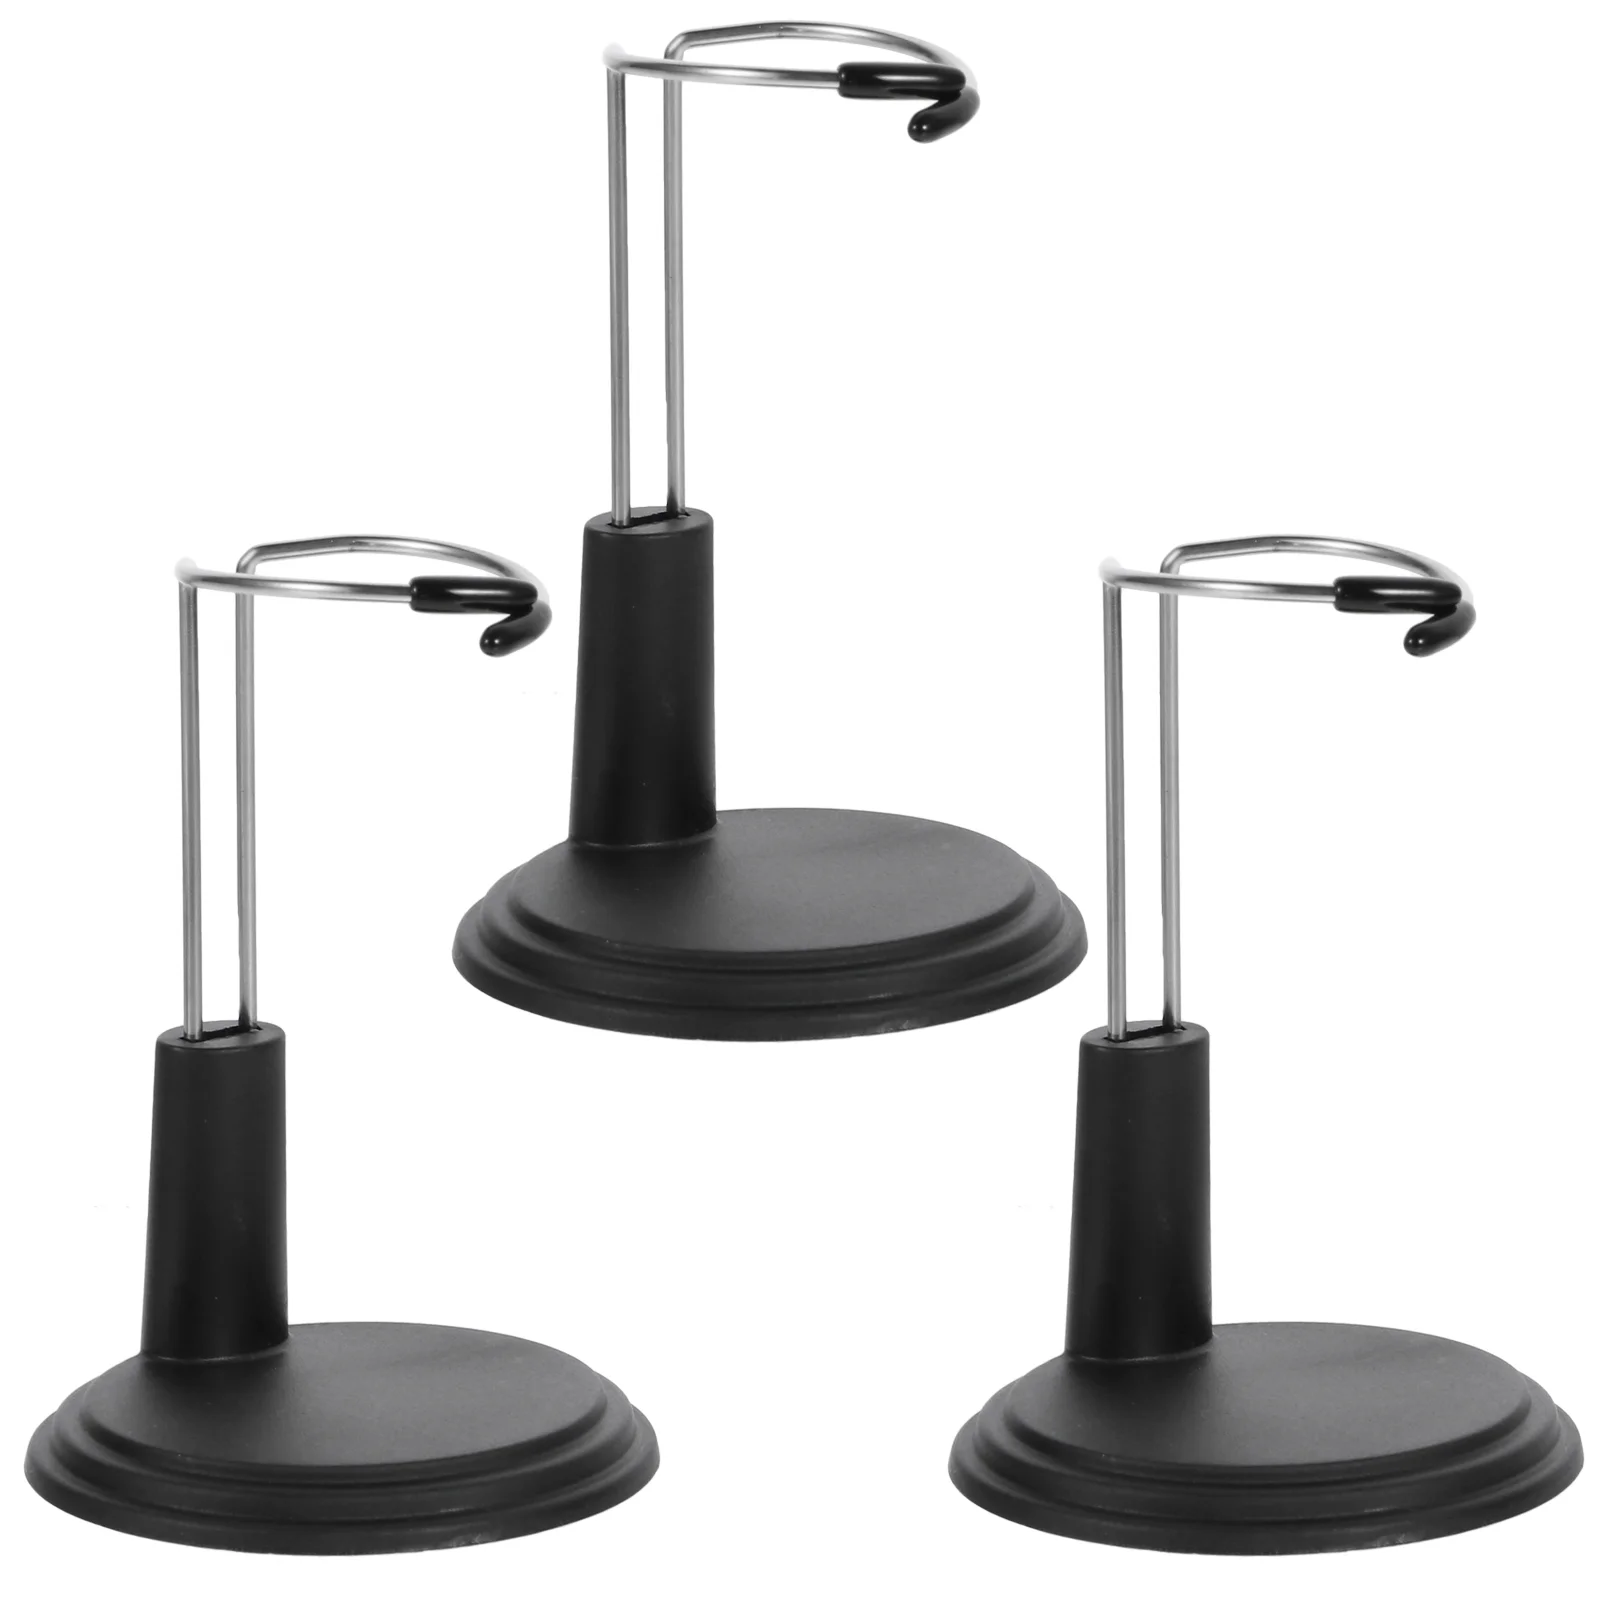 

3 PCS Miniatures Stand Stands Show Display Rack Support Frame Holding Bracket